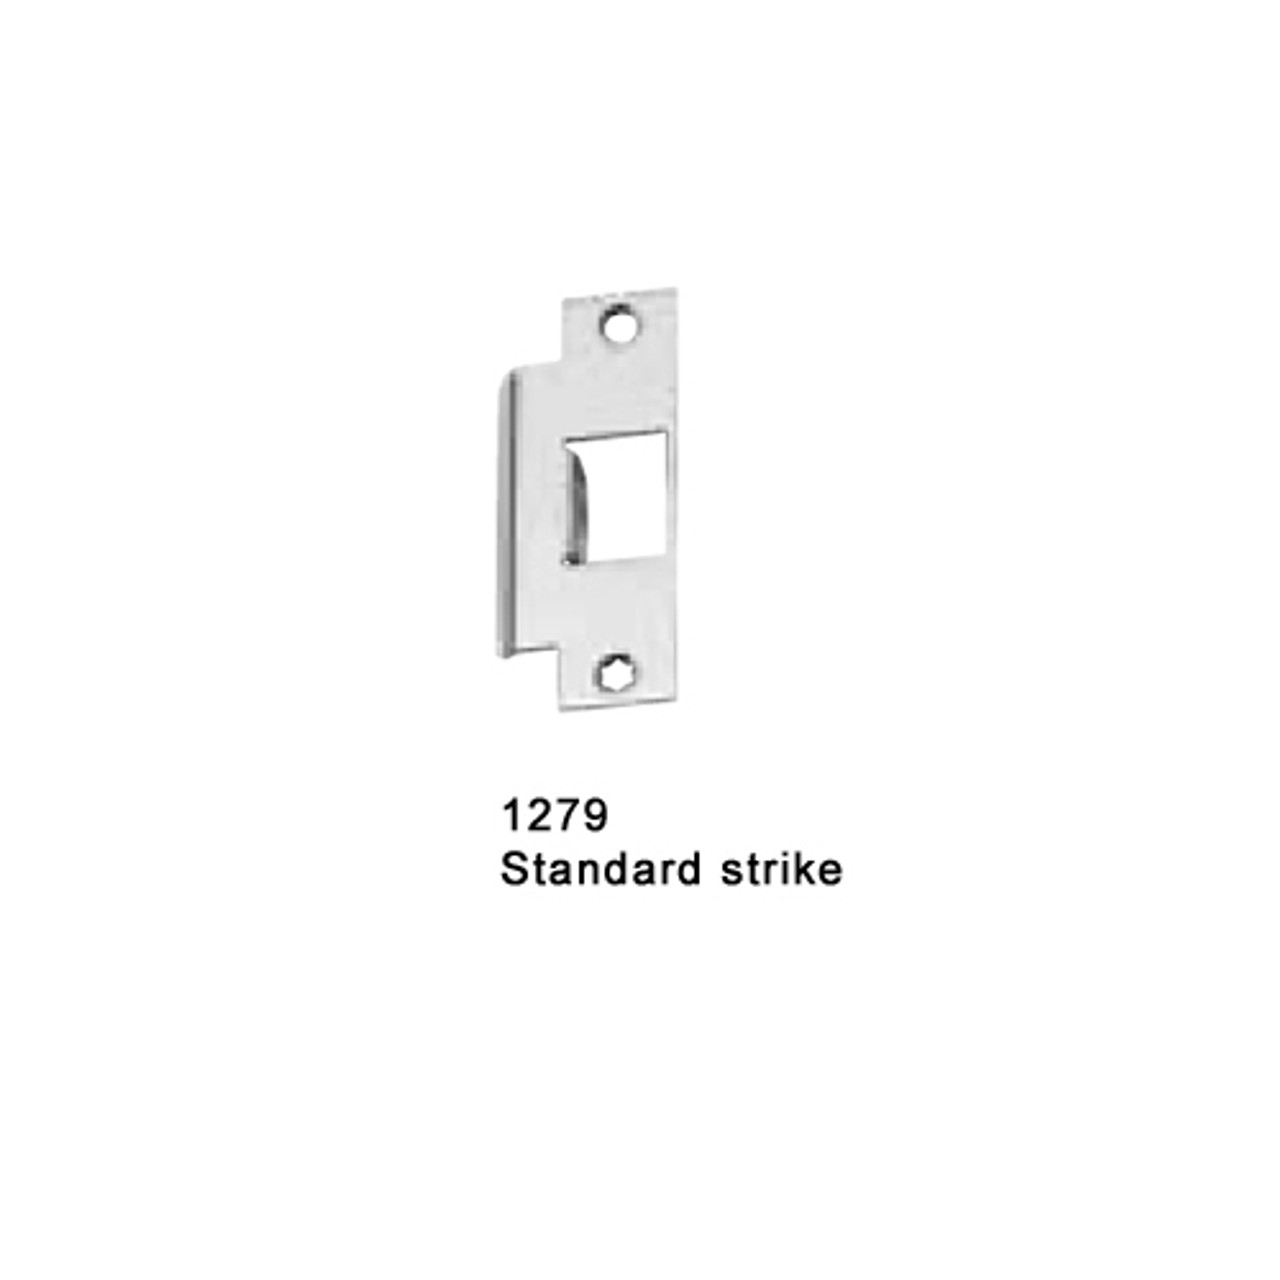 F-25-M-L-Dane-US32-3-LHR Falcon 25 Series Fire Rated Mortise Lock Devices with 510L Dane Lever Trim in Polished Stainless Steel